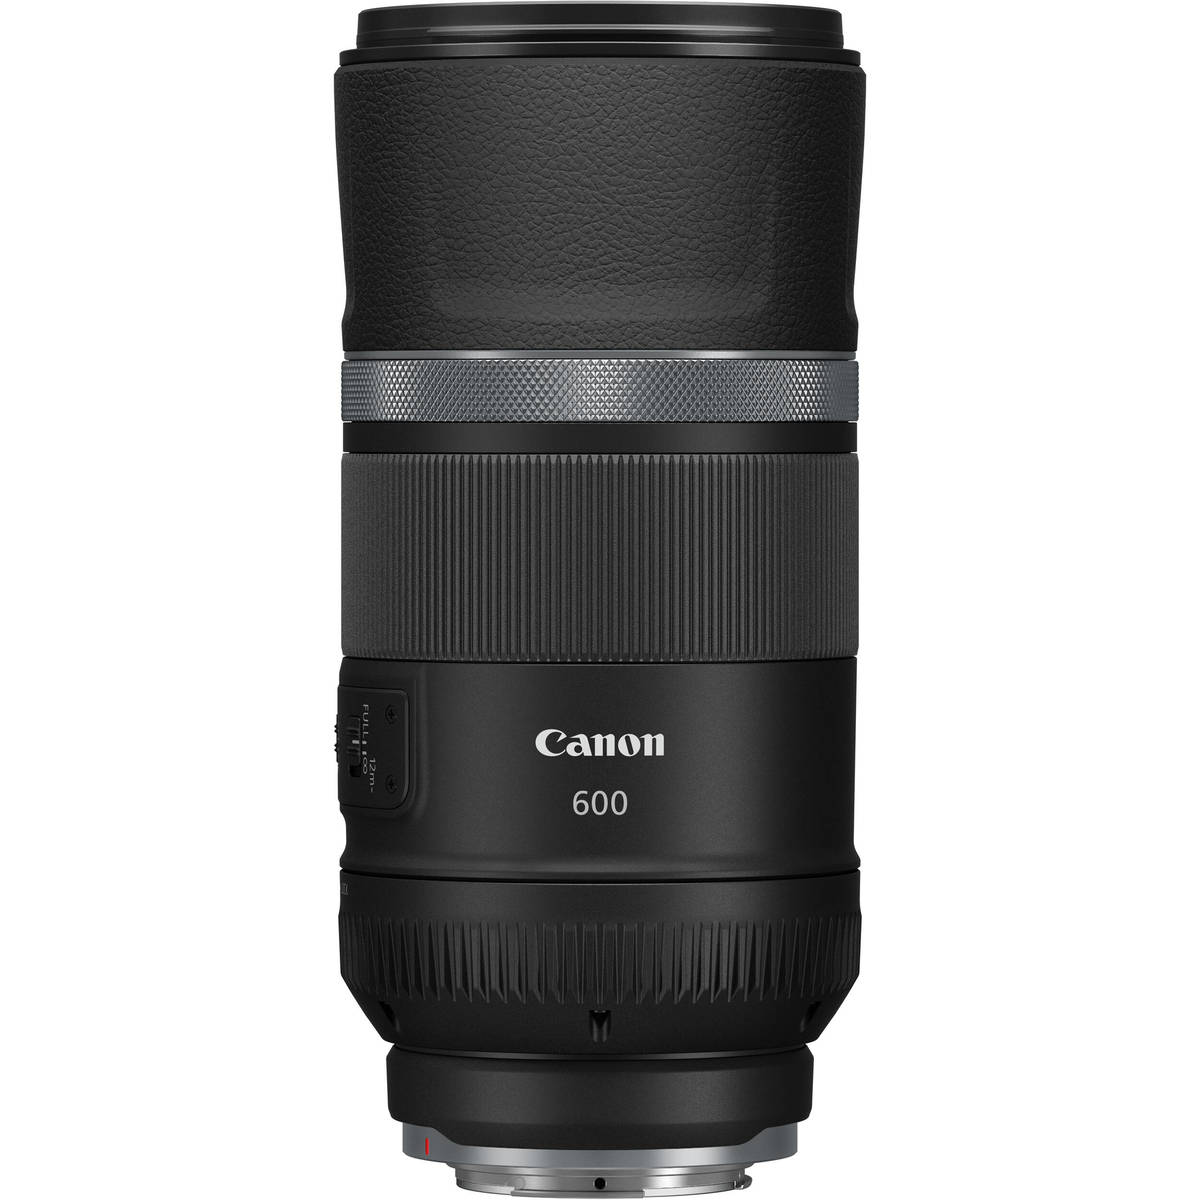 3. Canon RF 600mm F11 IS STM